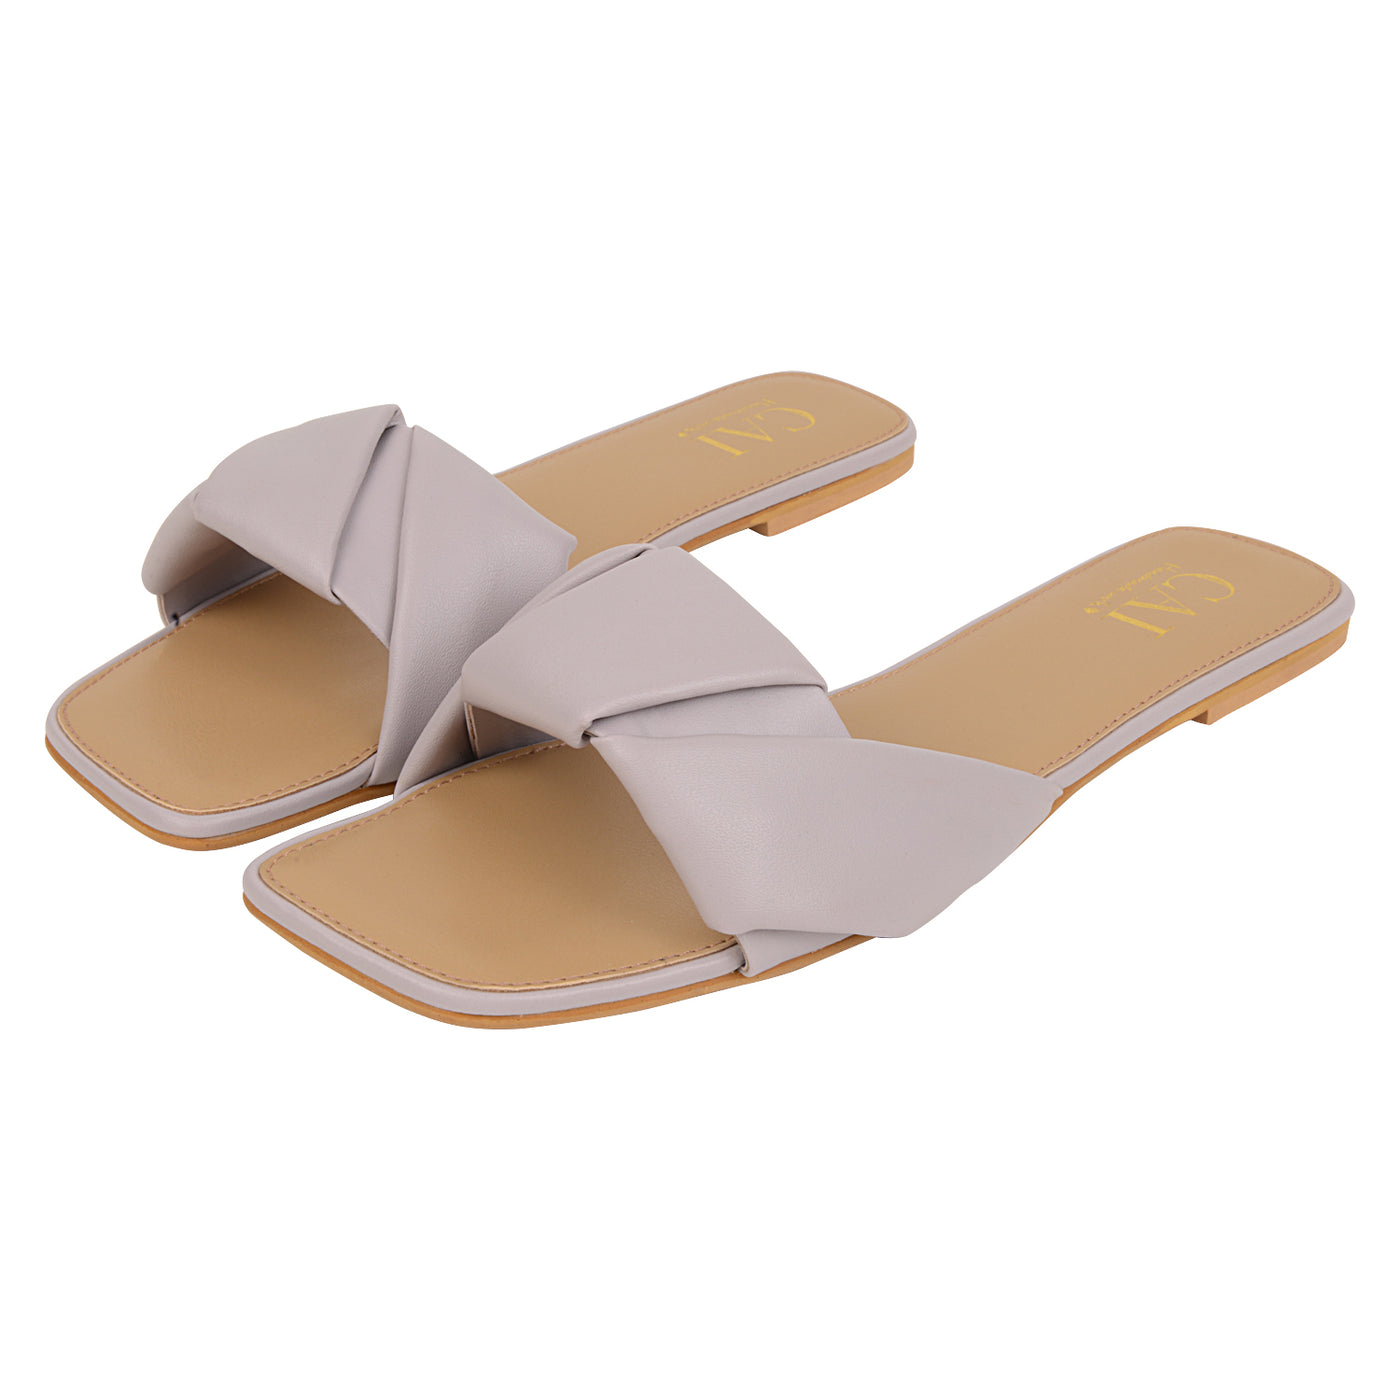 slip on sandals - the cai store